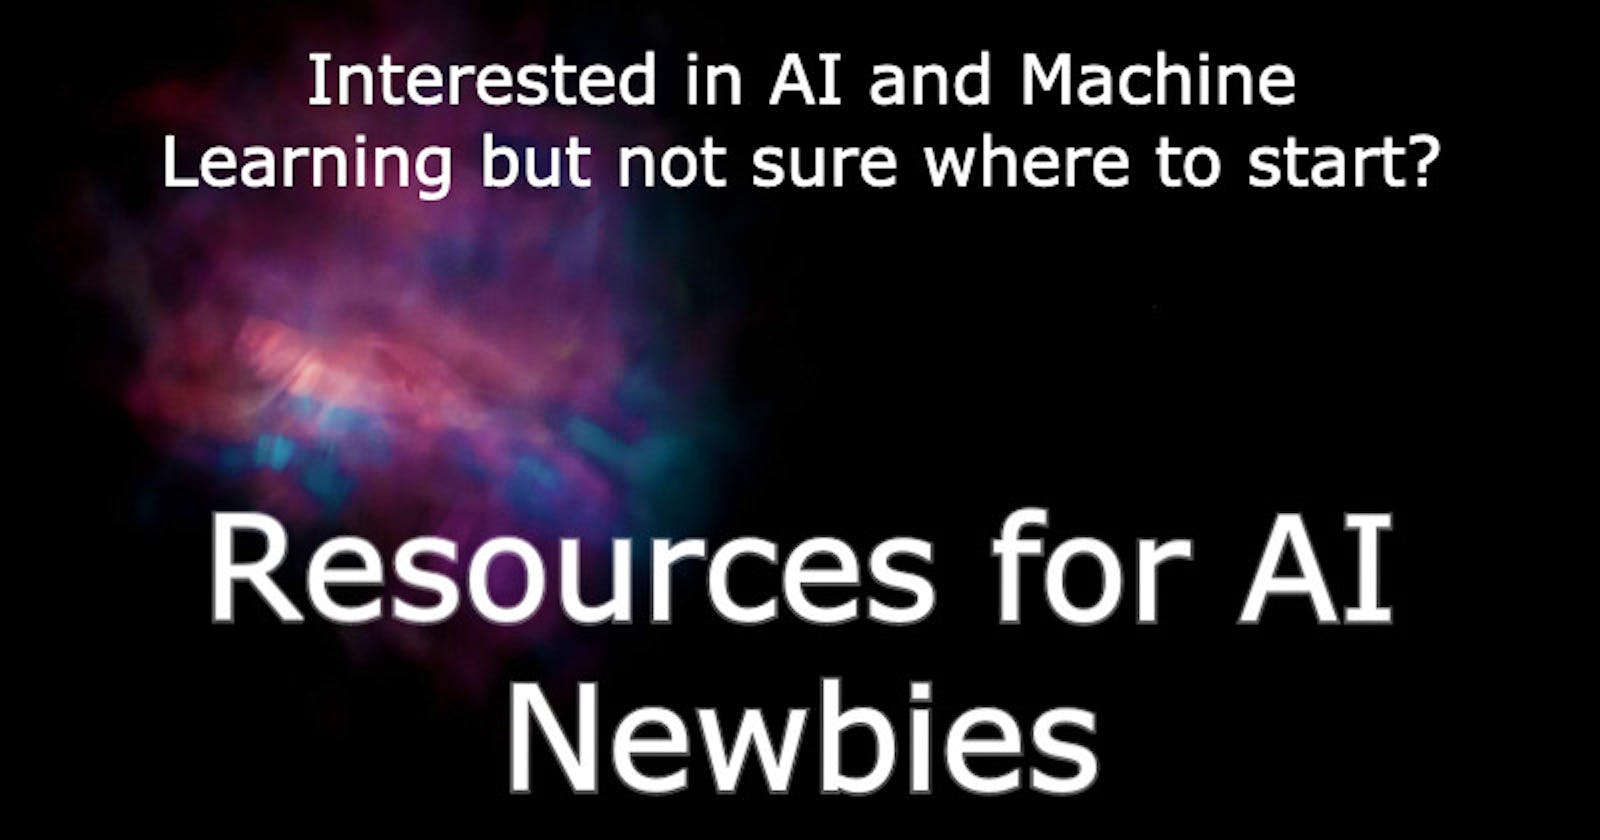 A Newbie's Guide to AI Resources